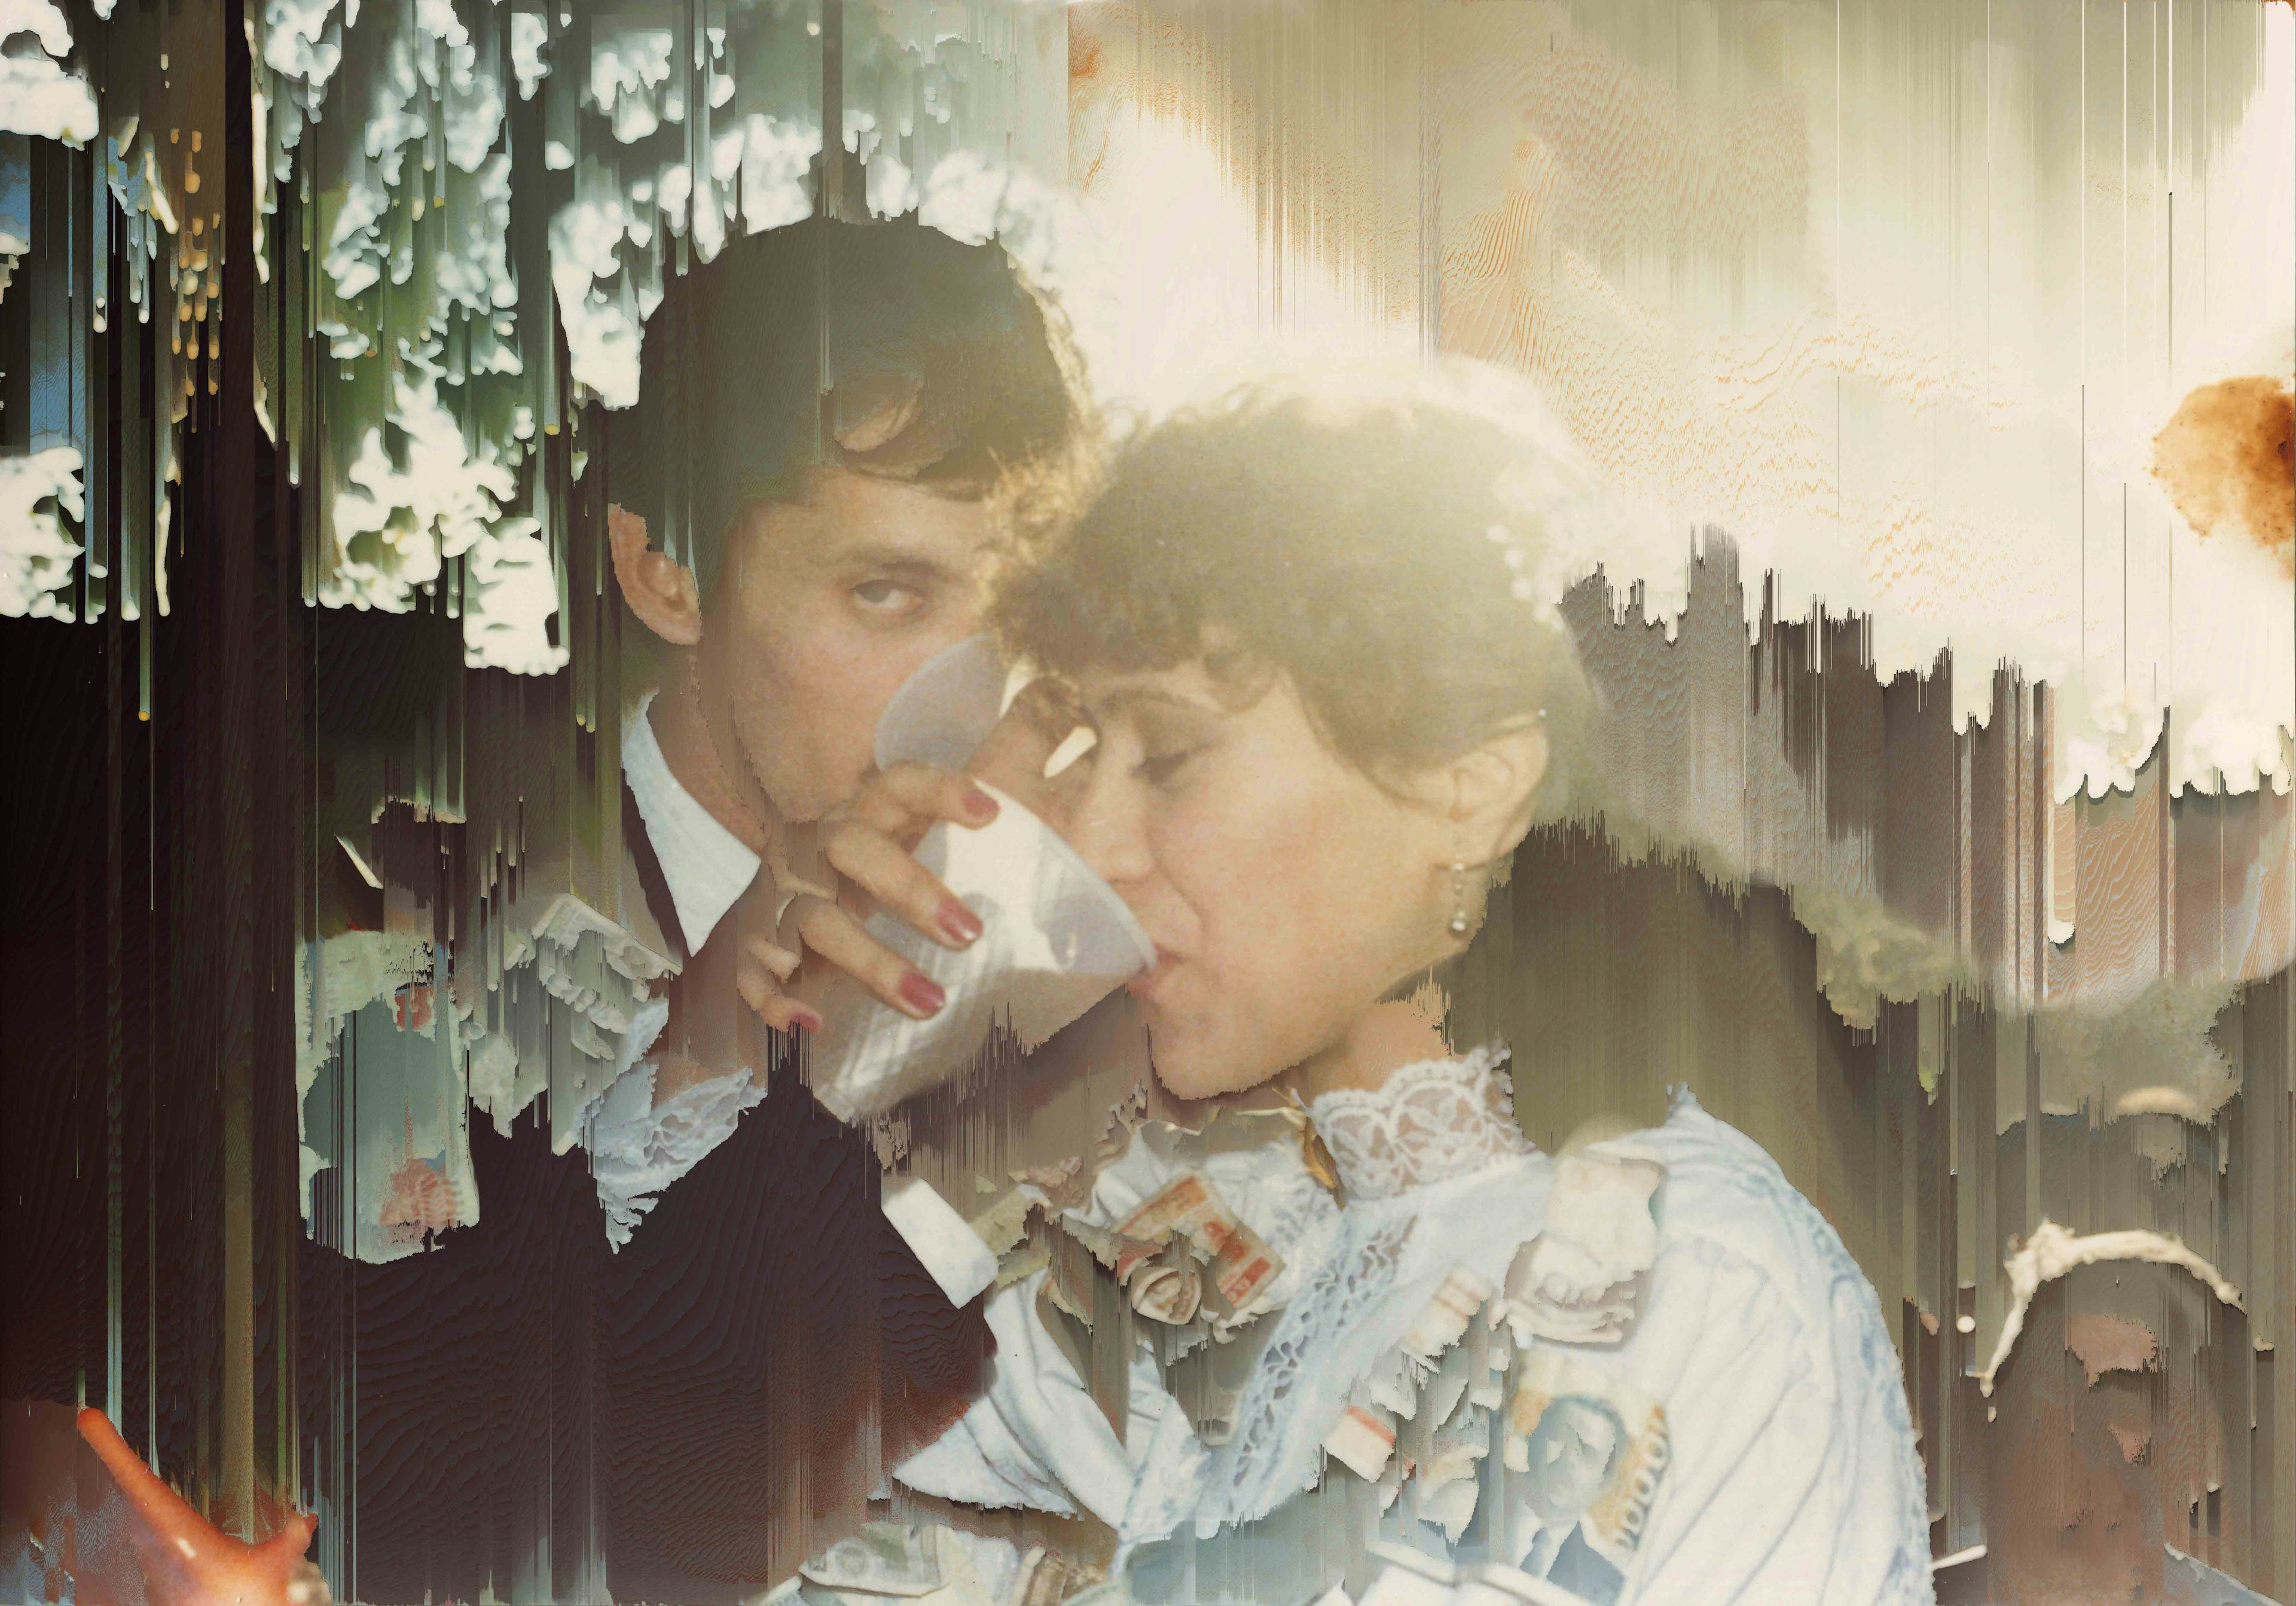 Archival image of the artist's parents wedding, showing them drinking from a cup whilst interlocking arms. The pixels are manipulated in a way that appears to wipe out the photograph© Cristóbal Ascencio Ramos